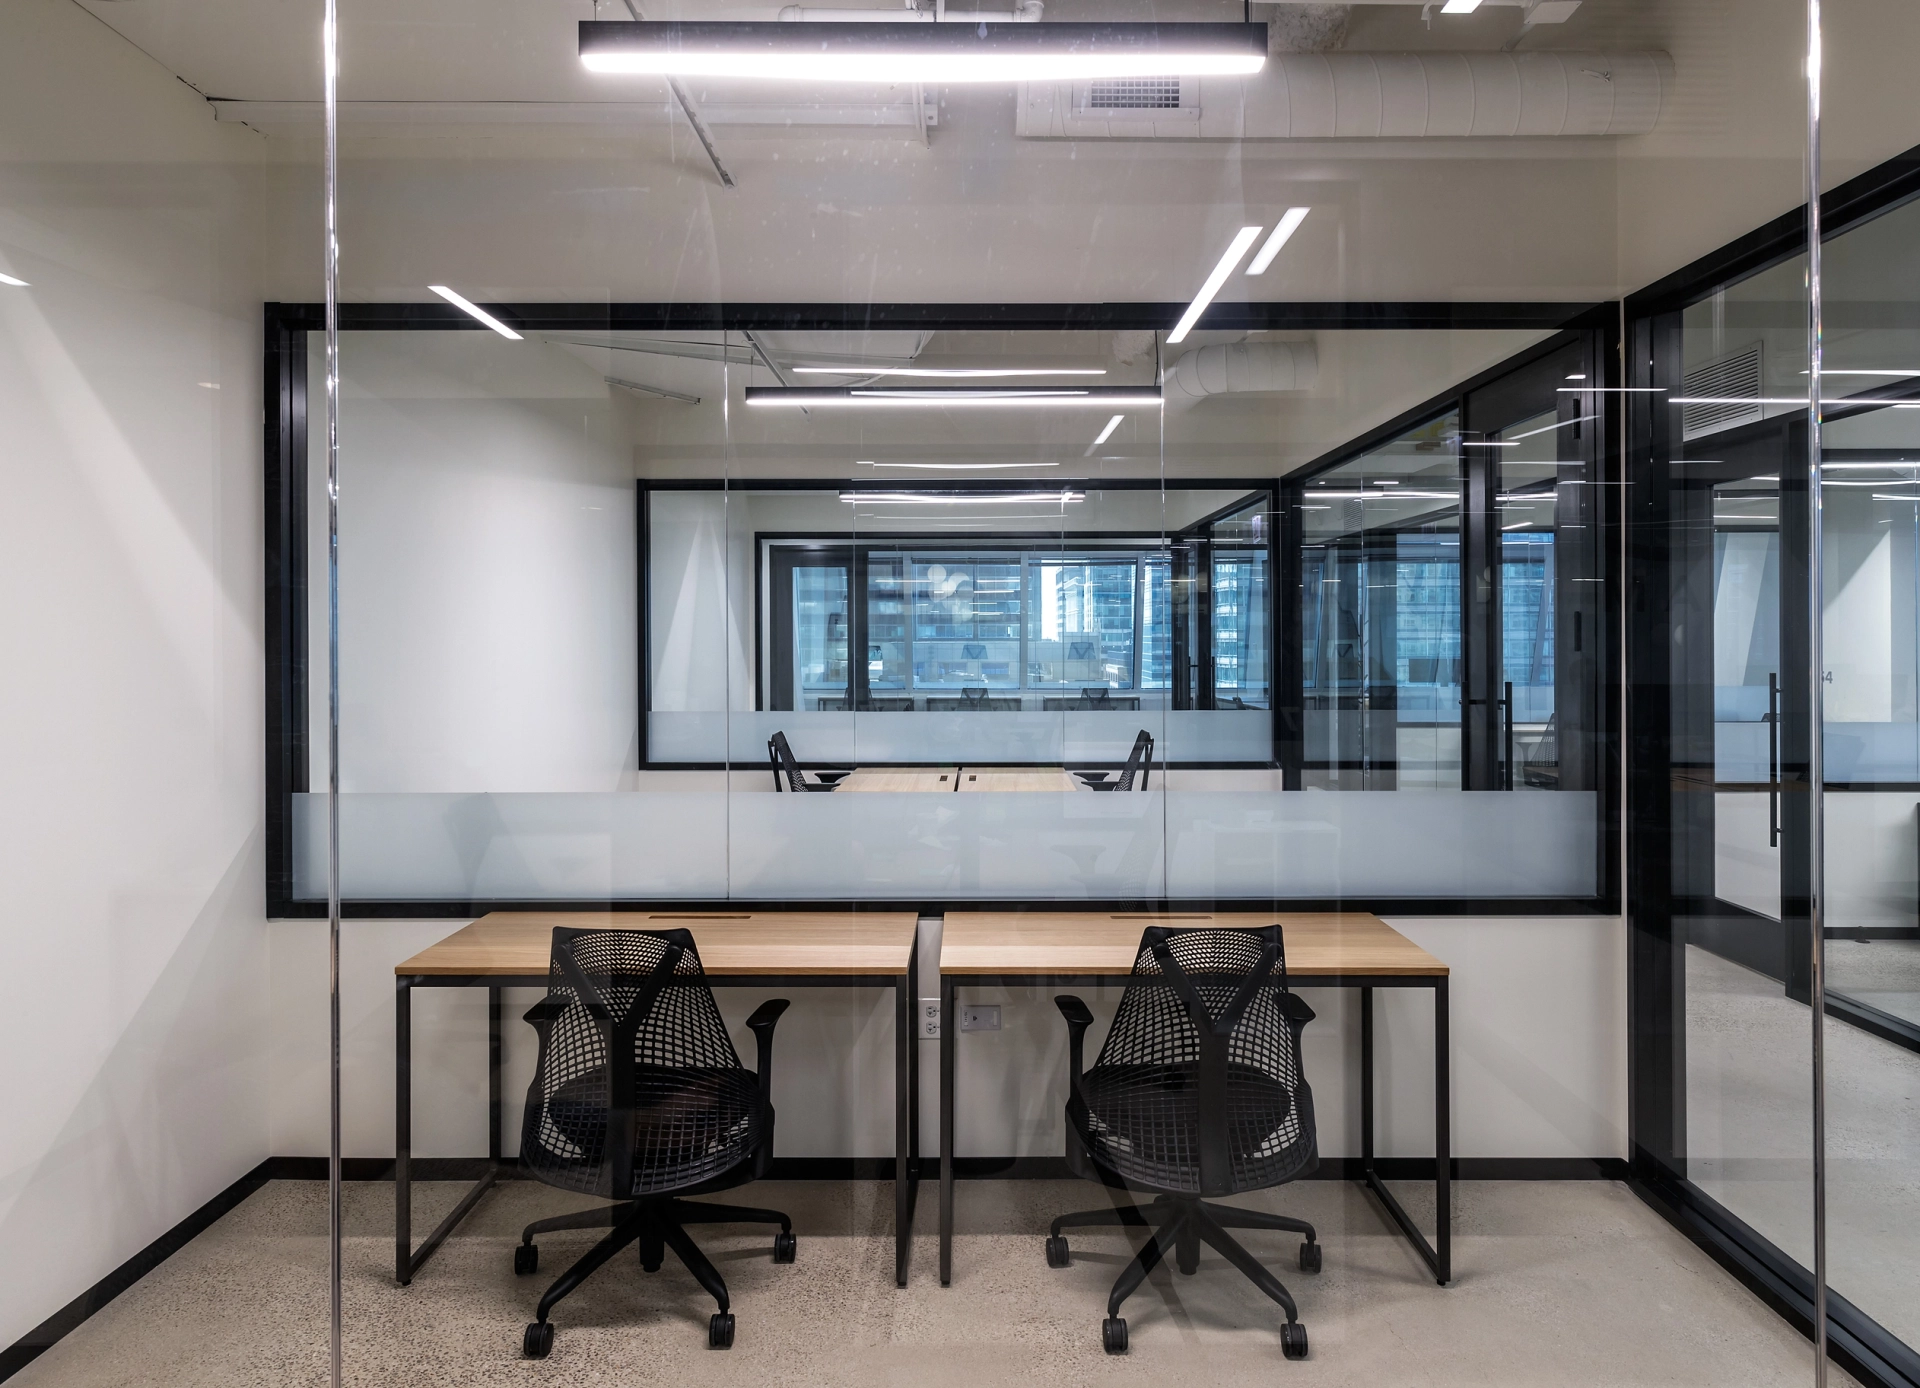 A coworking office in Chicago featuring glass walls, two desks, and chairs.